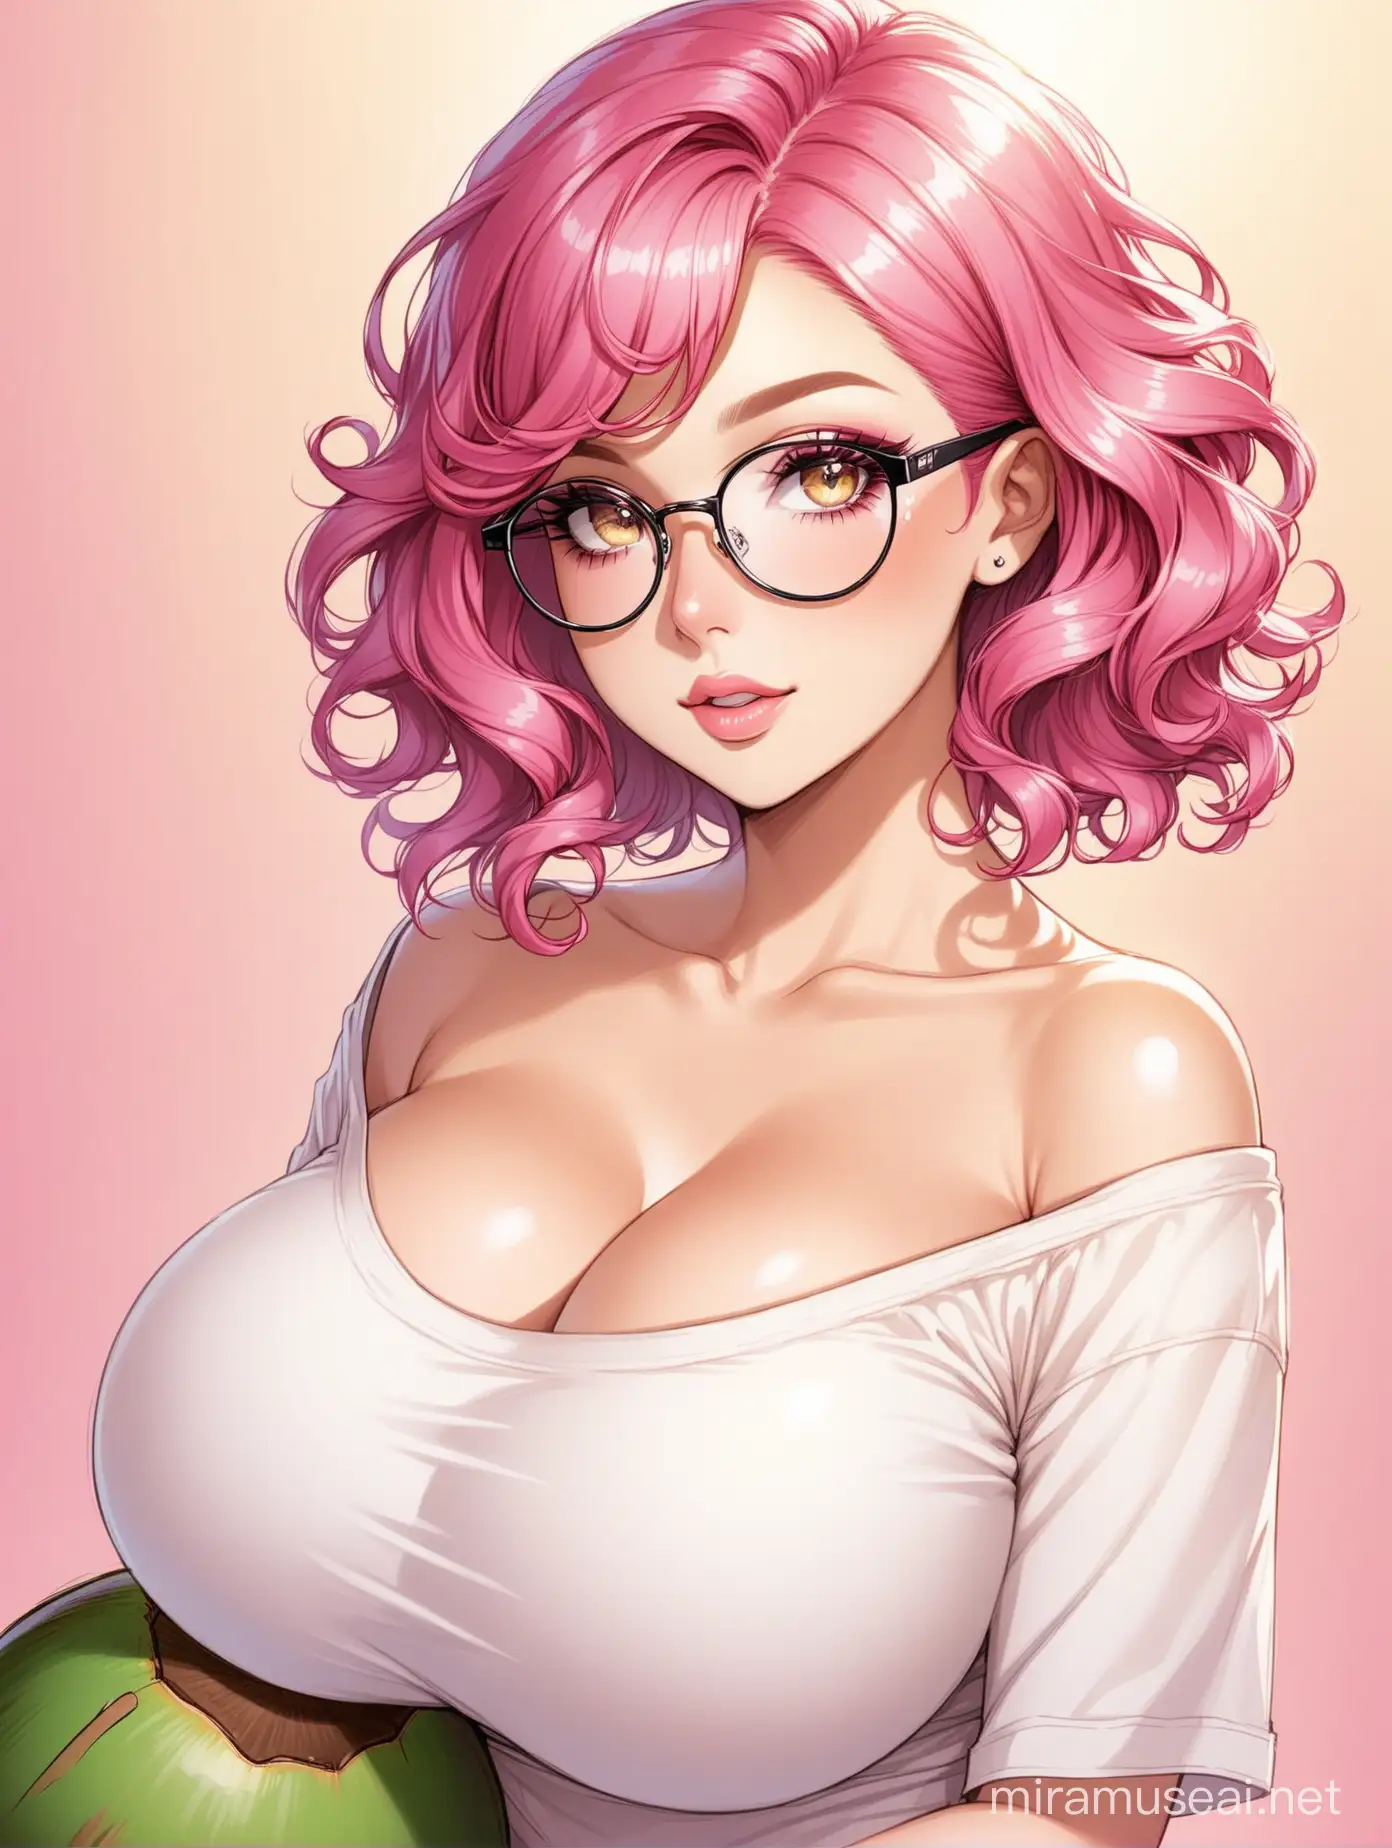 Short curly pink hair,glasses,gorgeous,wearing makeup,big breast,wearing a beautiful coconut top